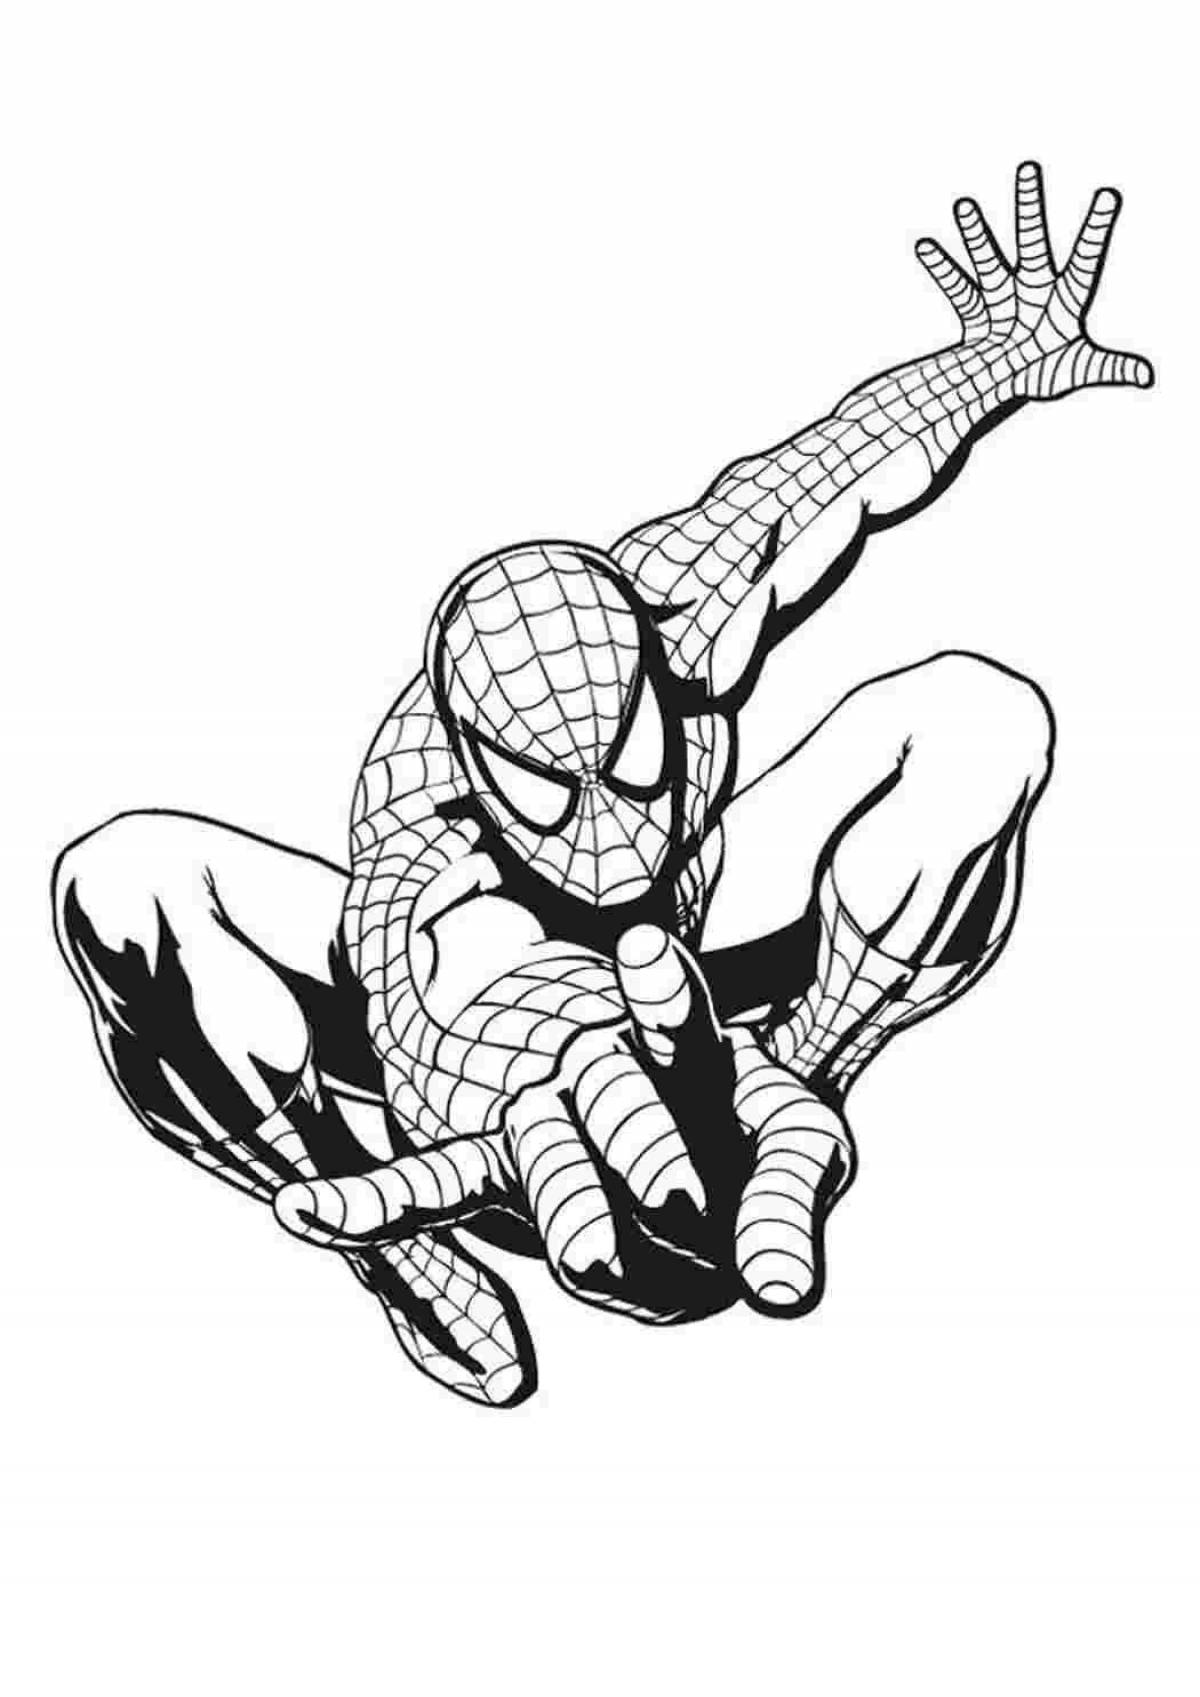 Spiderman's adorable Christmas coloring book